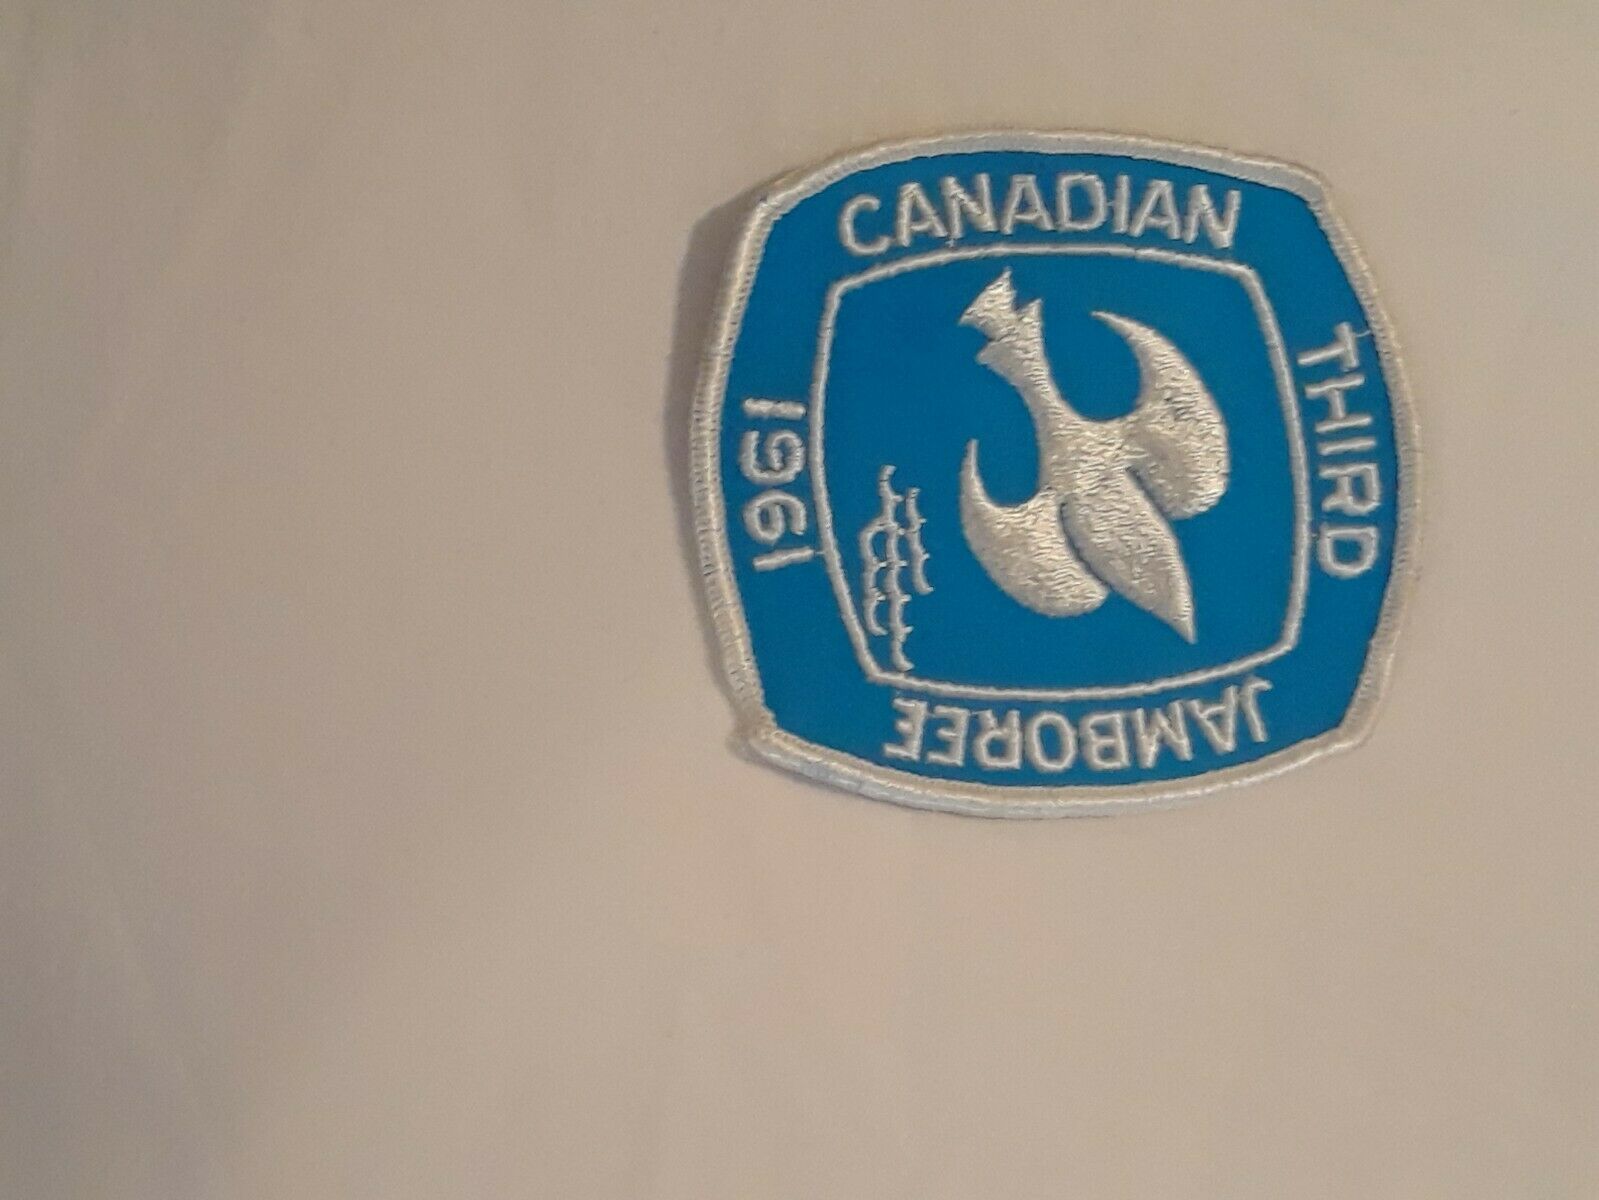 3rd Canadian Jamboree 1961 Patch - New